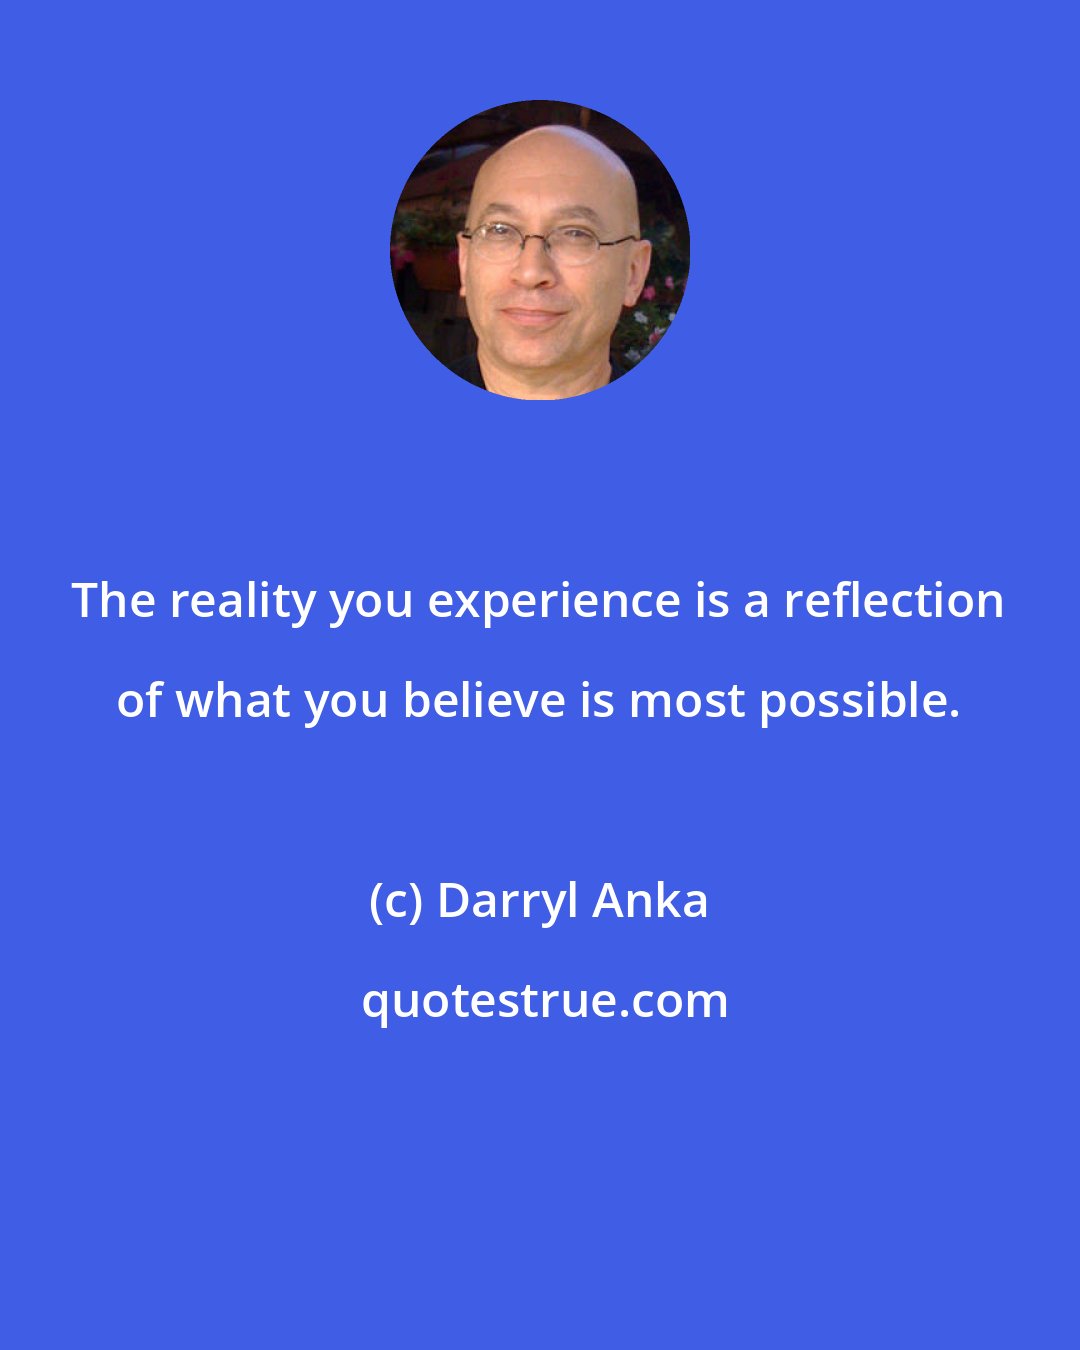 Darryl Anka: The reality you experience is a reflection of what you believe is most possible.